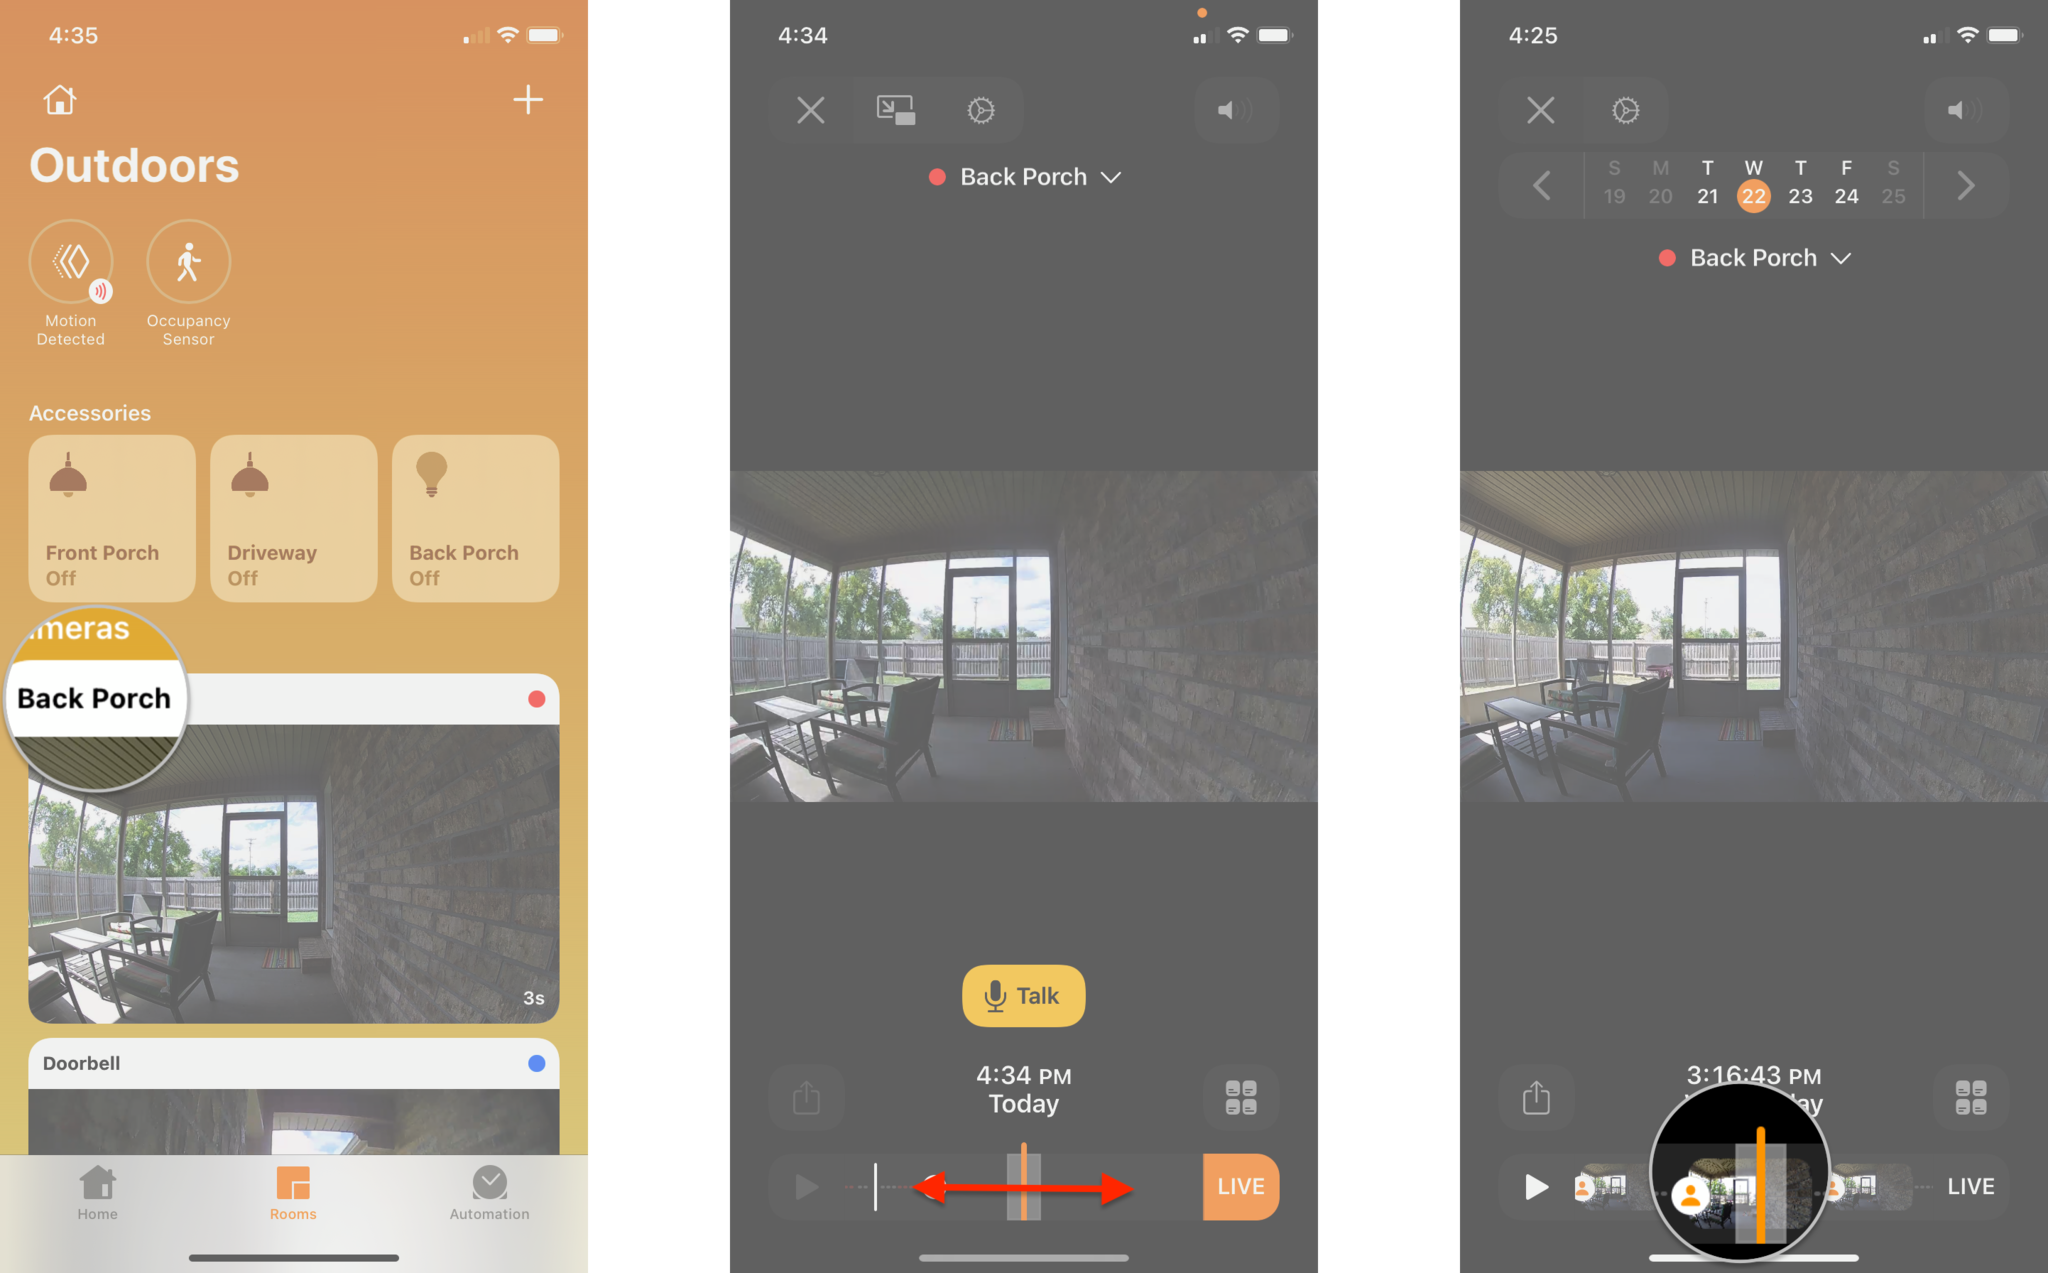 How to view recorded video in the Home app on the iPhone by showing steps: Tap on a thumbnail image for your camera, Swipe to the Left or Right on the timeline, Tap on a motion event to view the recording